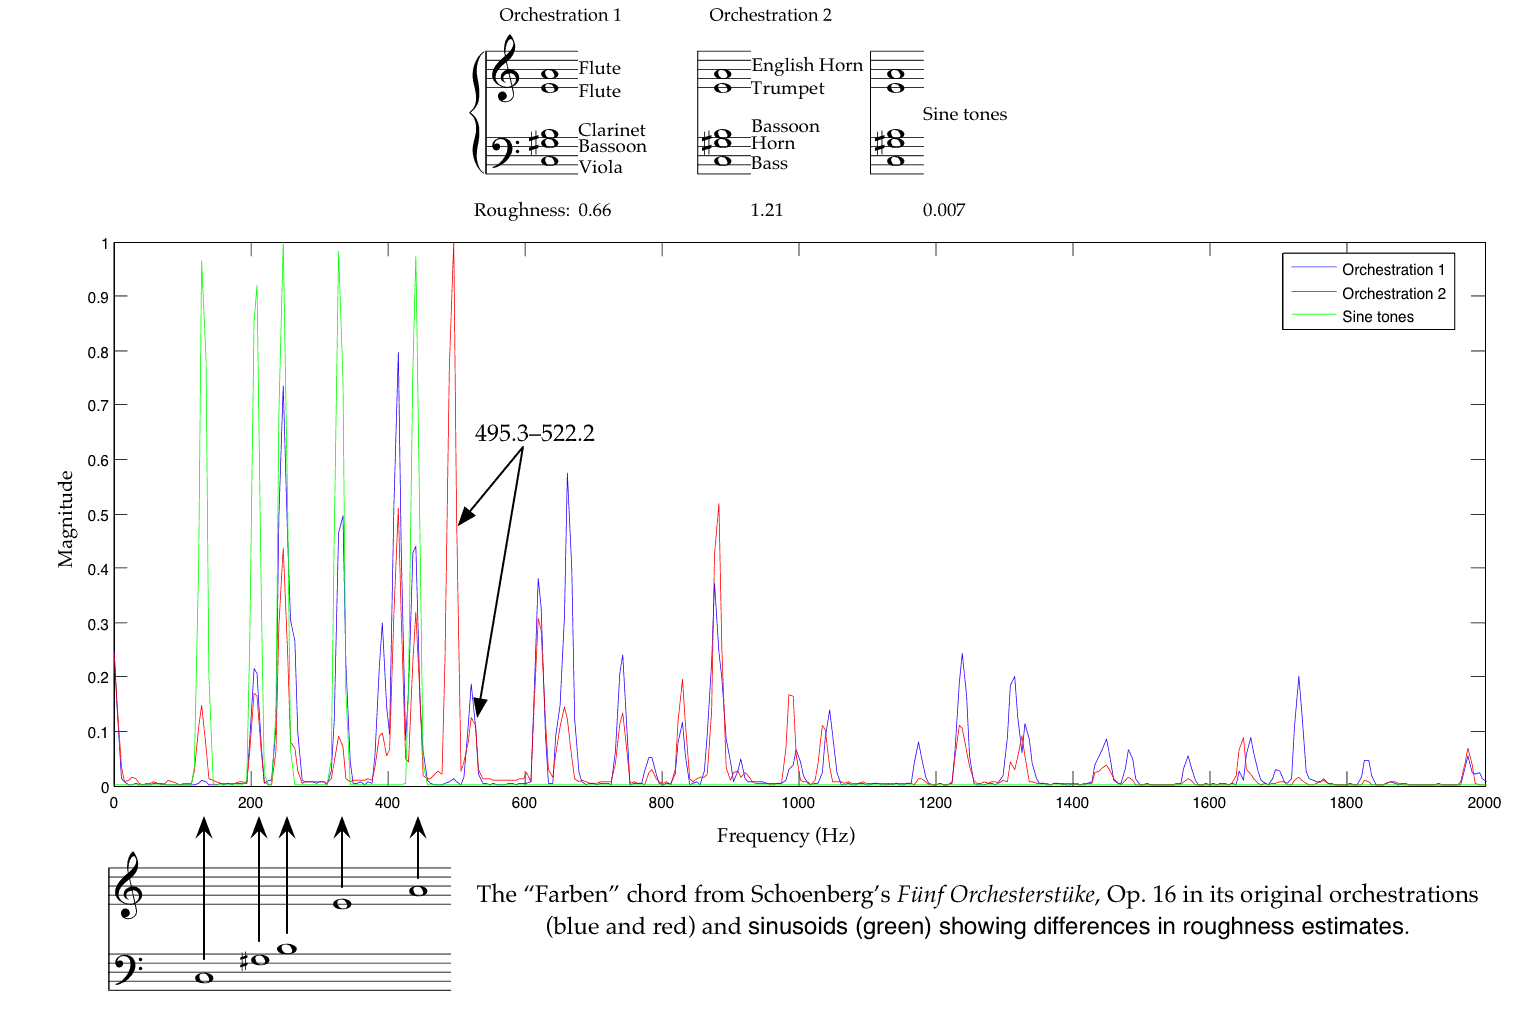 Spectral analysis of three orchestrations of the 'Farben'
chord.